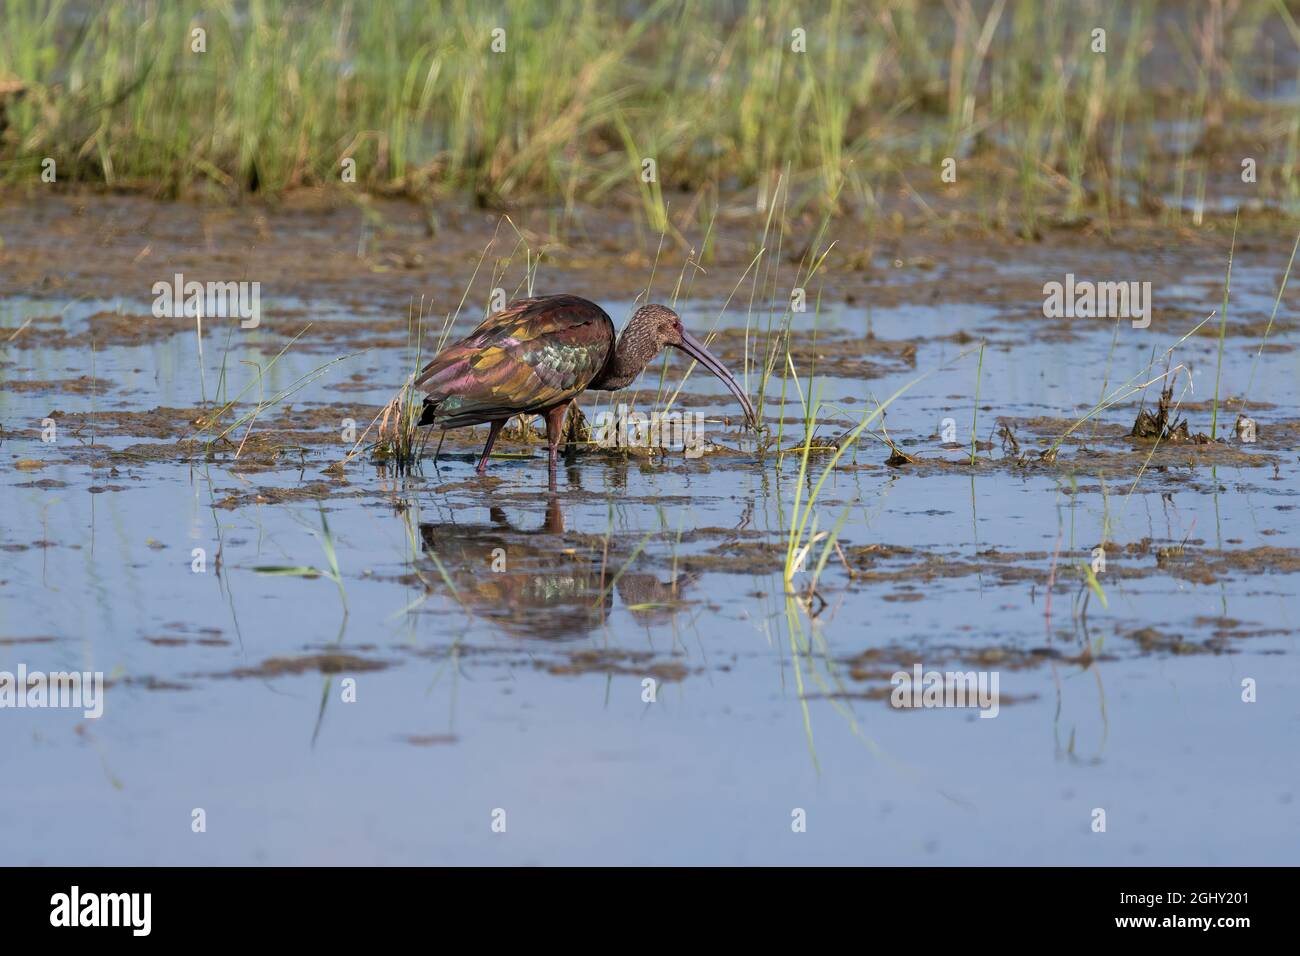 A White-faced Ibis wading in the mud of a grassy marsh by a lake as it searches for food on a sunny morning. Stock Photo